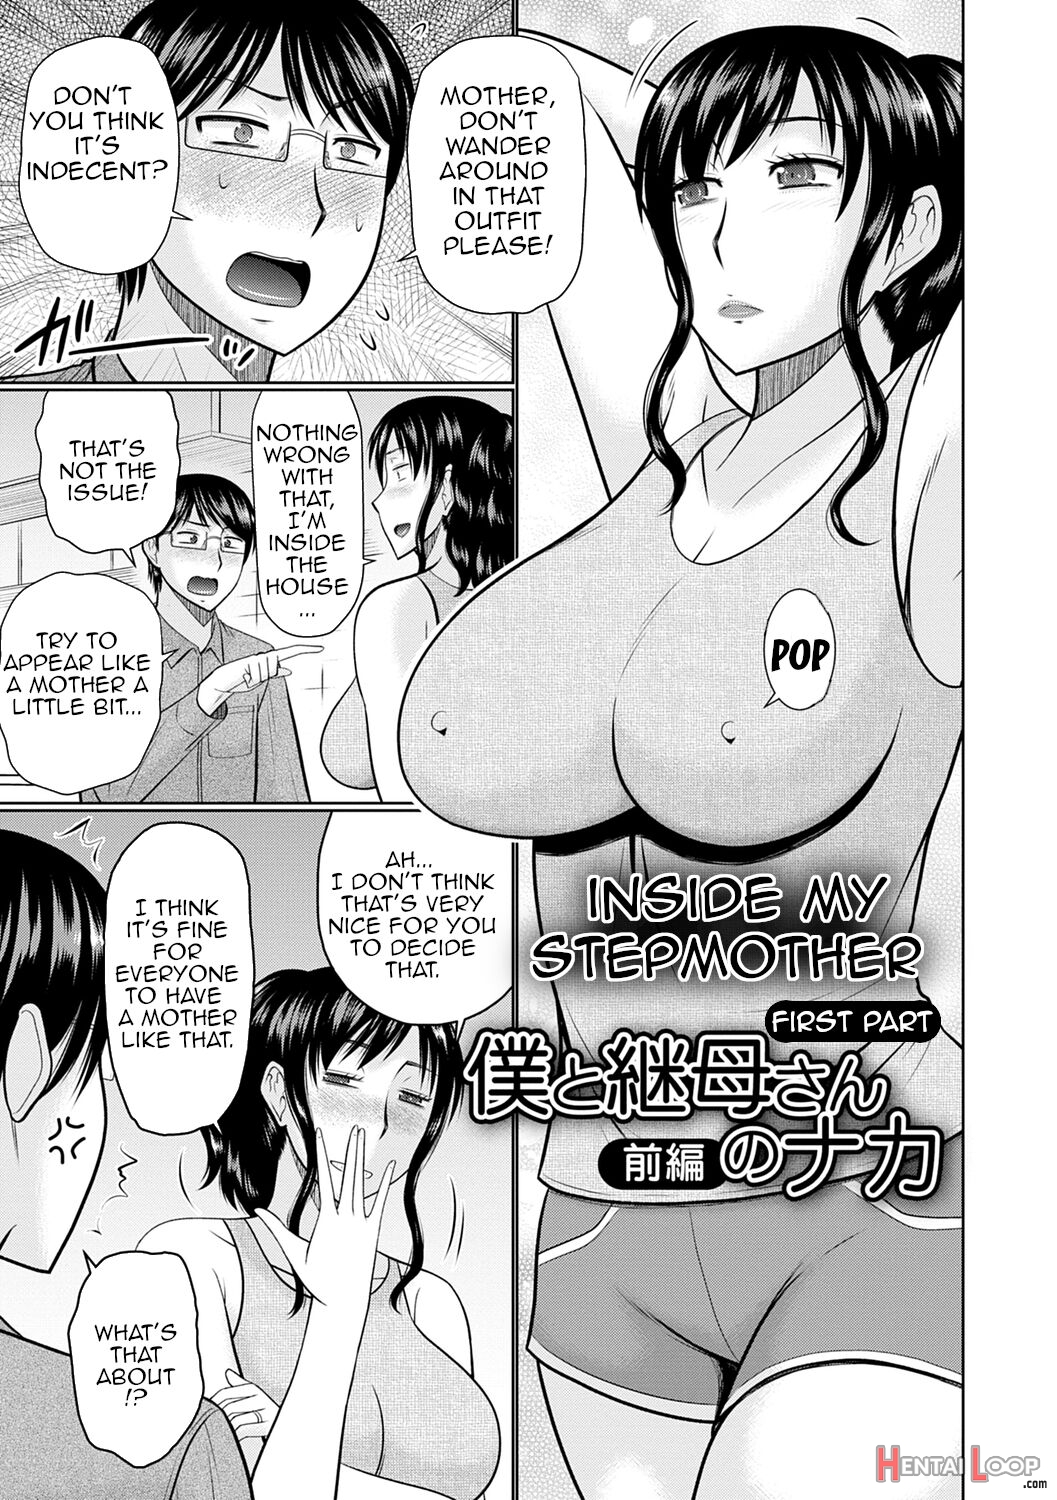 Inside My Stepmother (by Hatakeyama Tohya) - Hentai doujinshi for free at  HentaiLoop